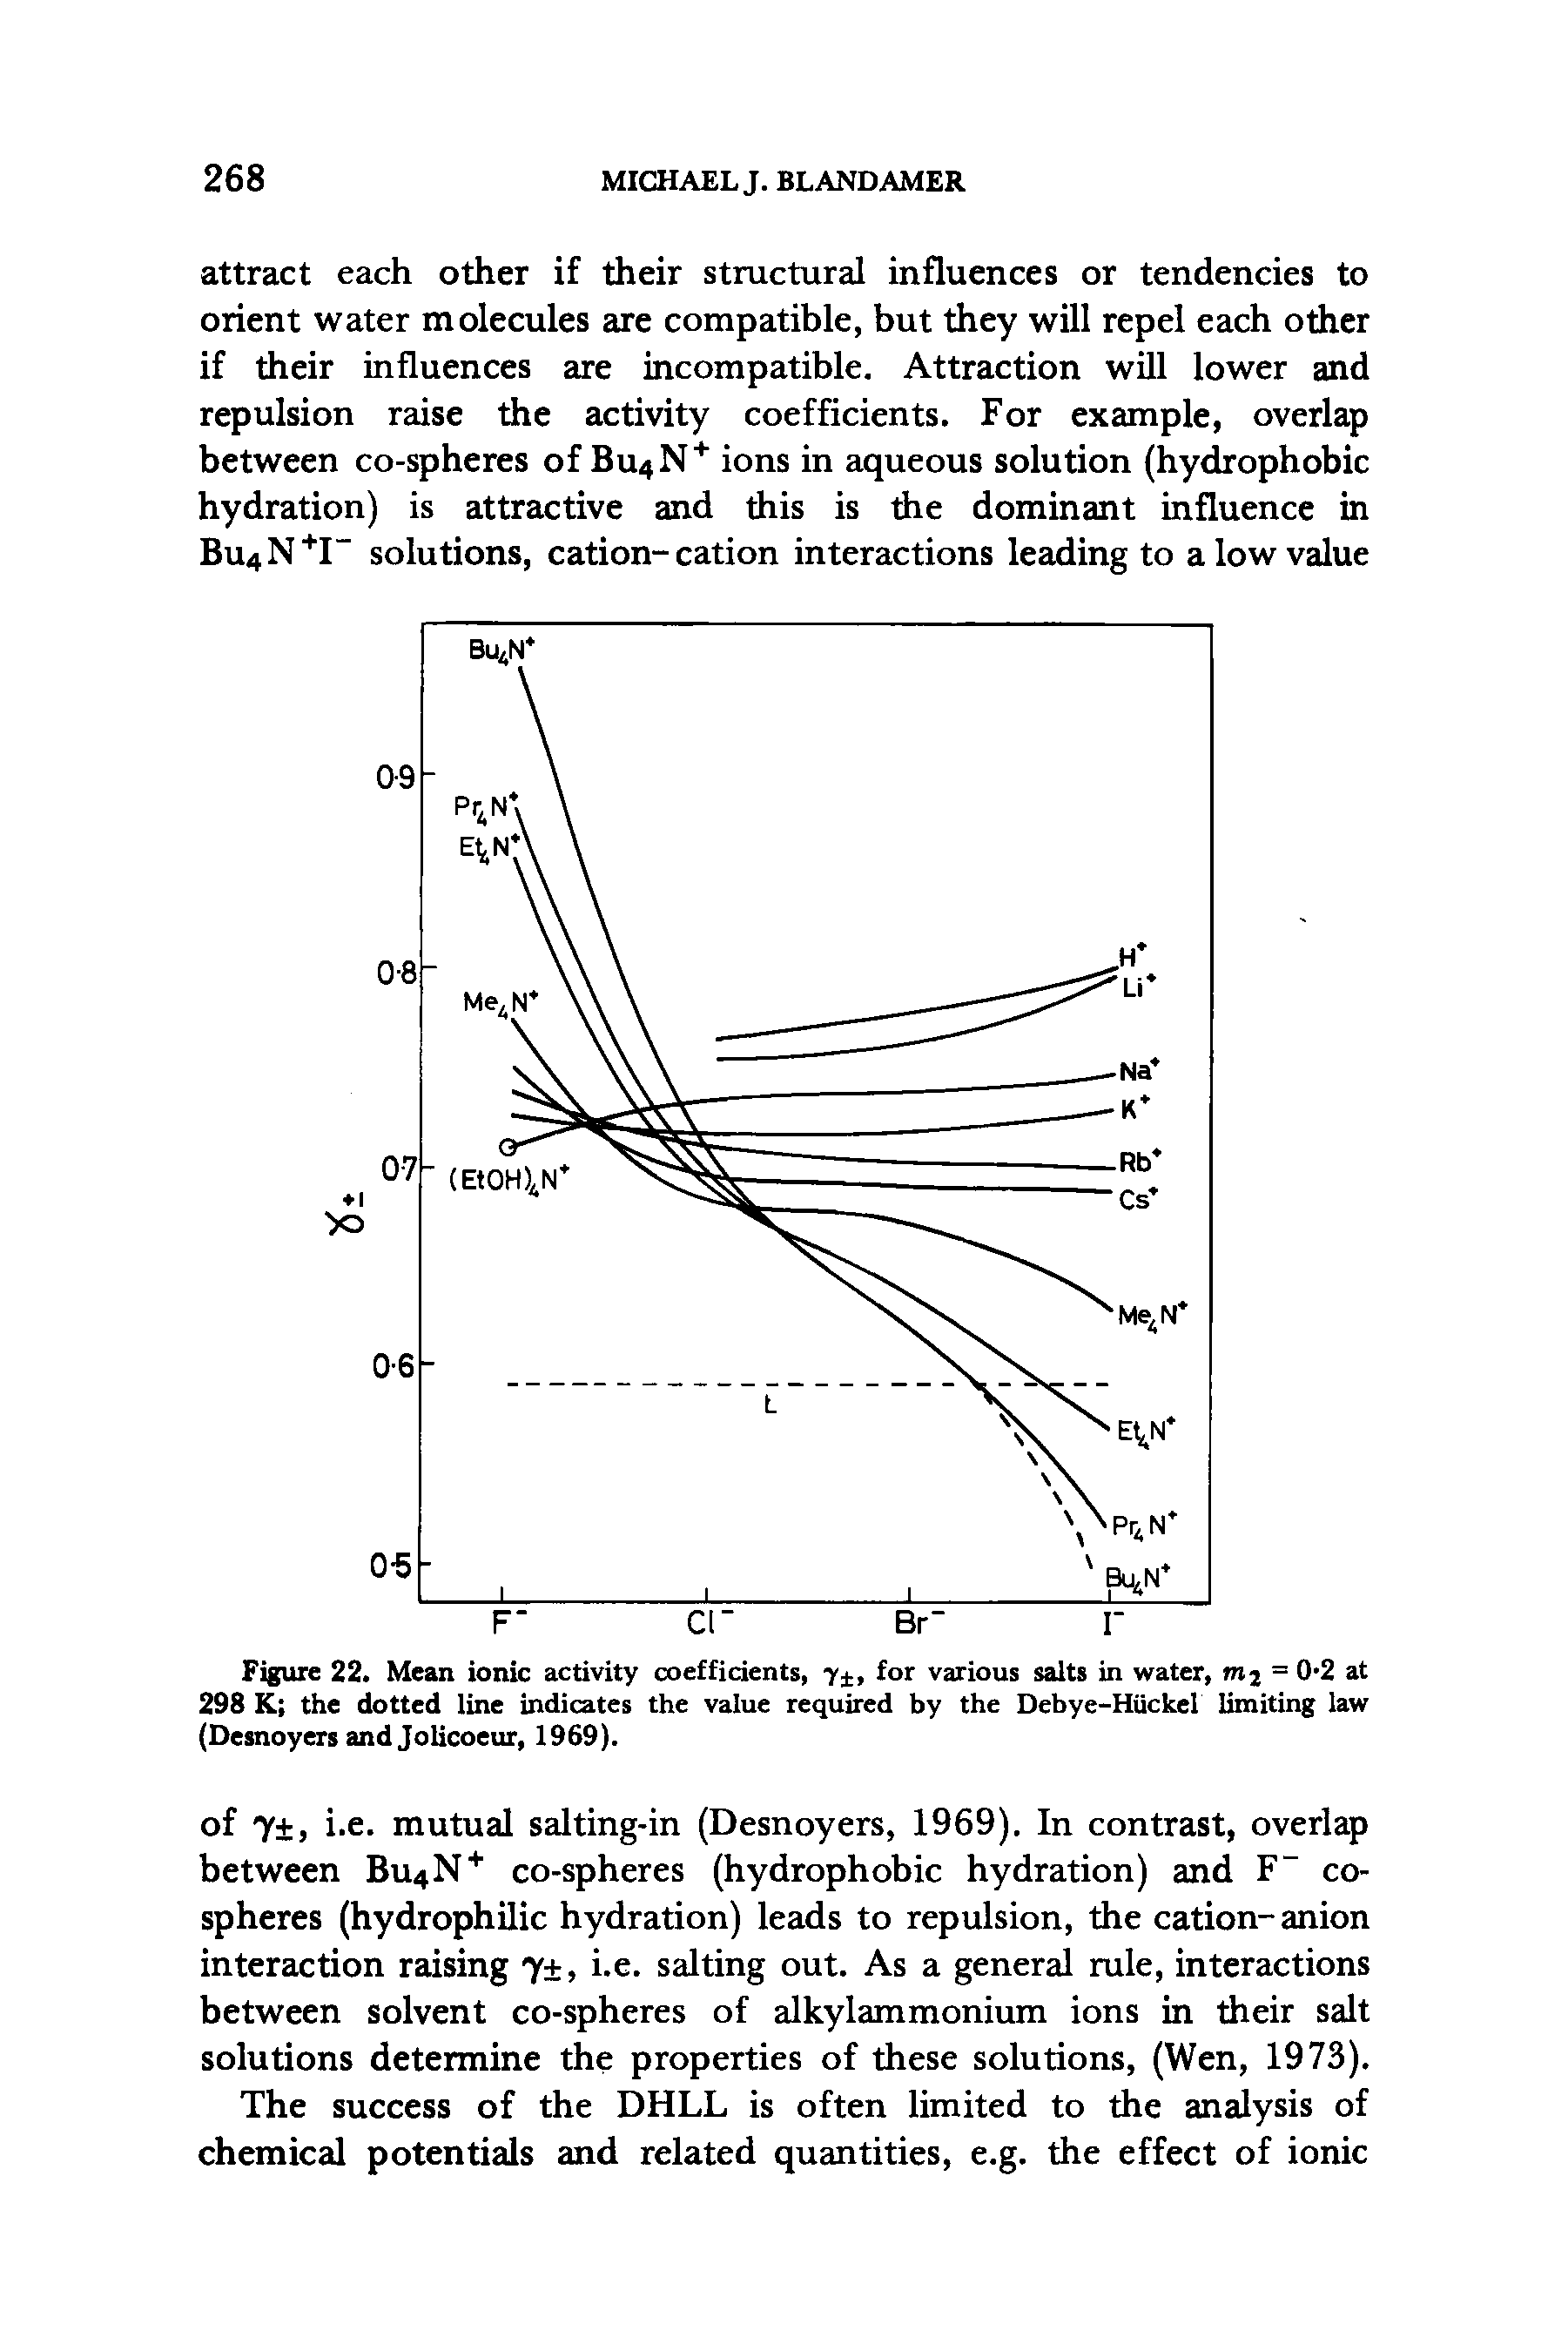 Figure 22. Mean ionic activity coefficients, y , for various salts in water, mj = 0-2 at 298 K the dotted line indicates the value required by the Debye-Huckel limiting law (Desnoyers and Jolicoeur, 1969).